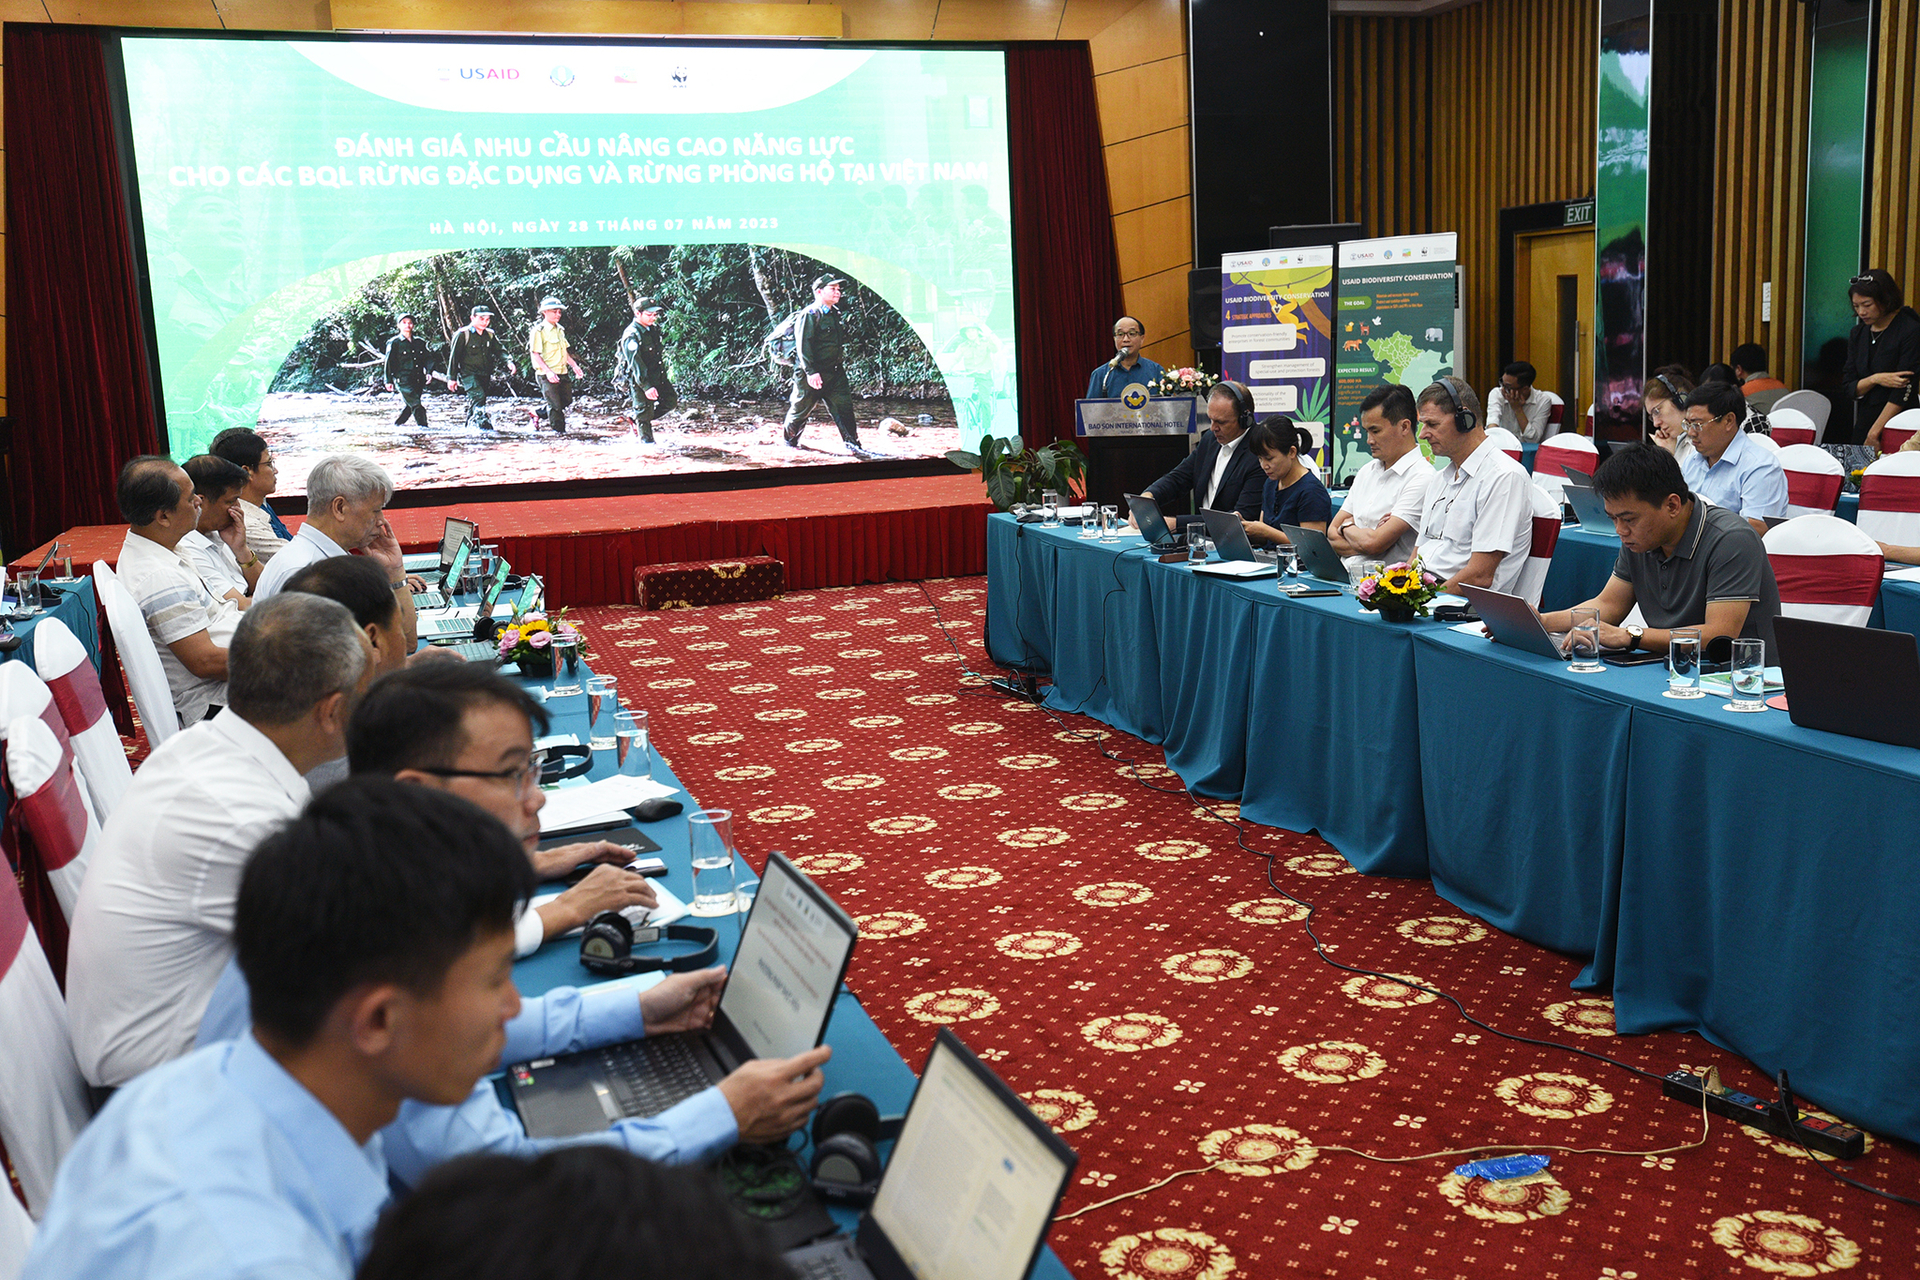 Workshop to assess the need to improve management capacity for special-use and protection forests in Vietnam on July 28 morning. Photo: Tung Dinh.